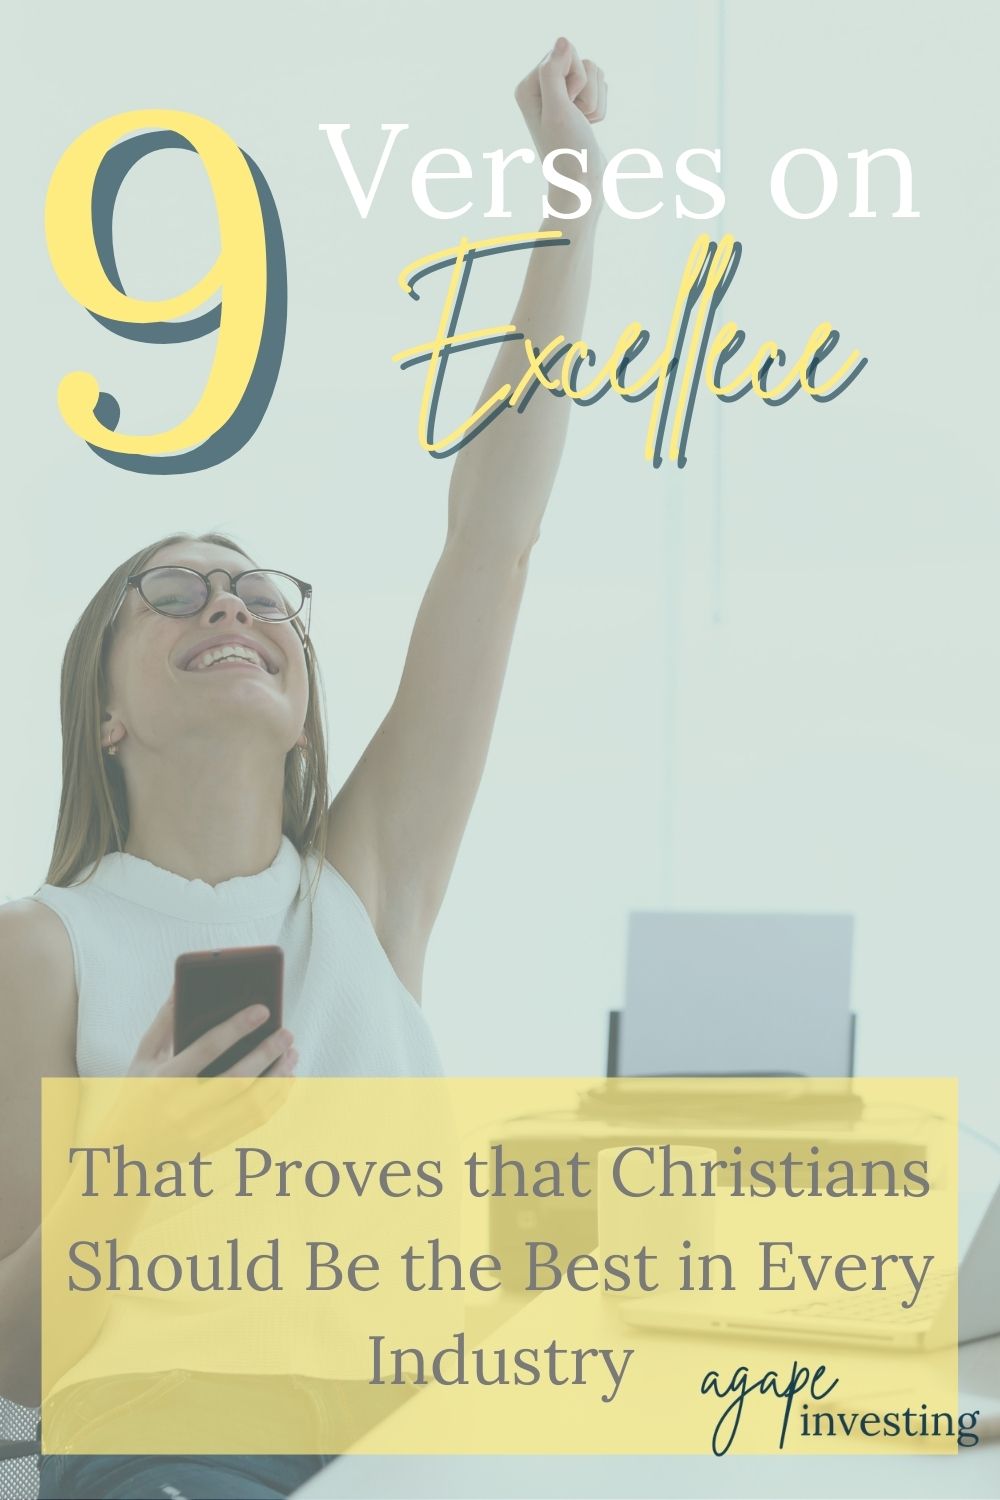 excellence quotes bible